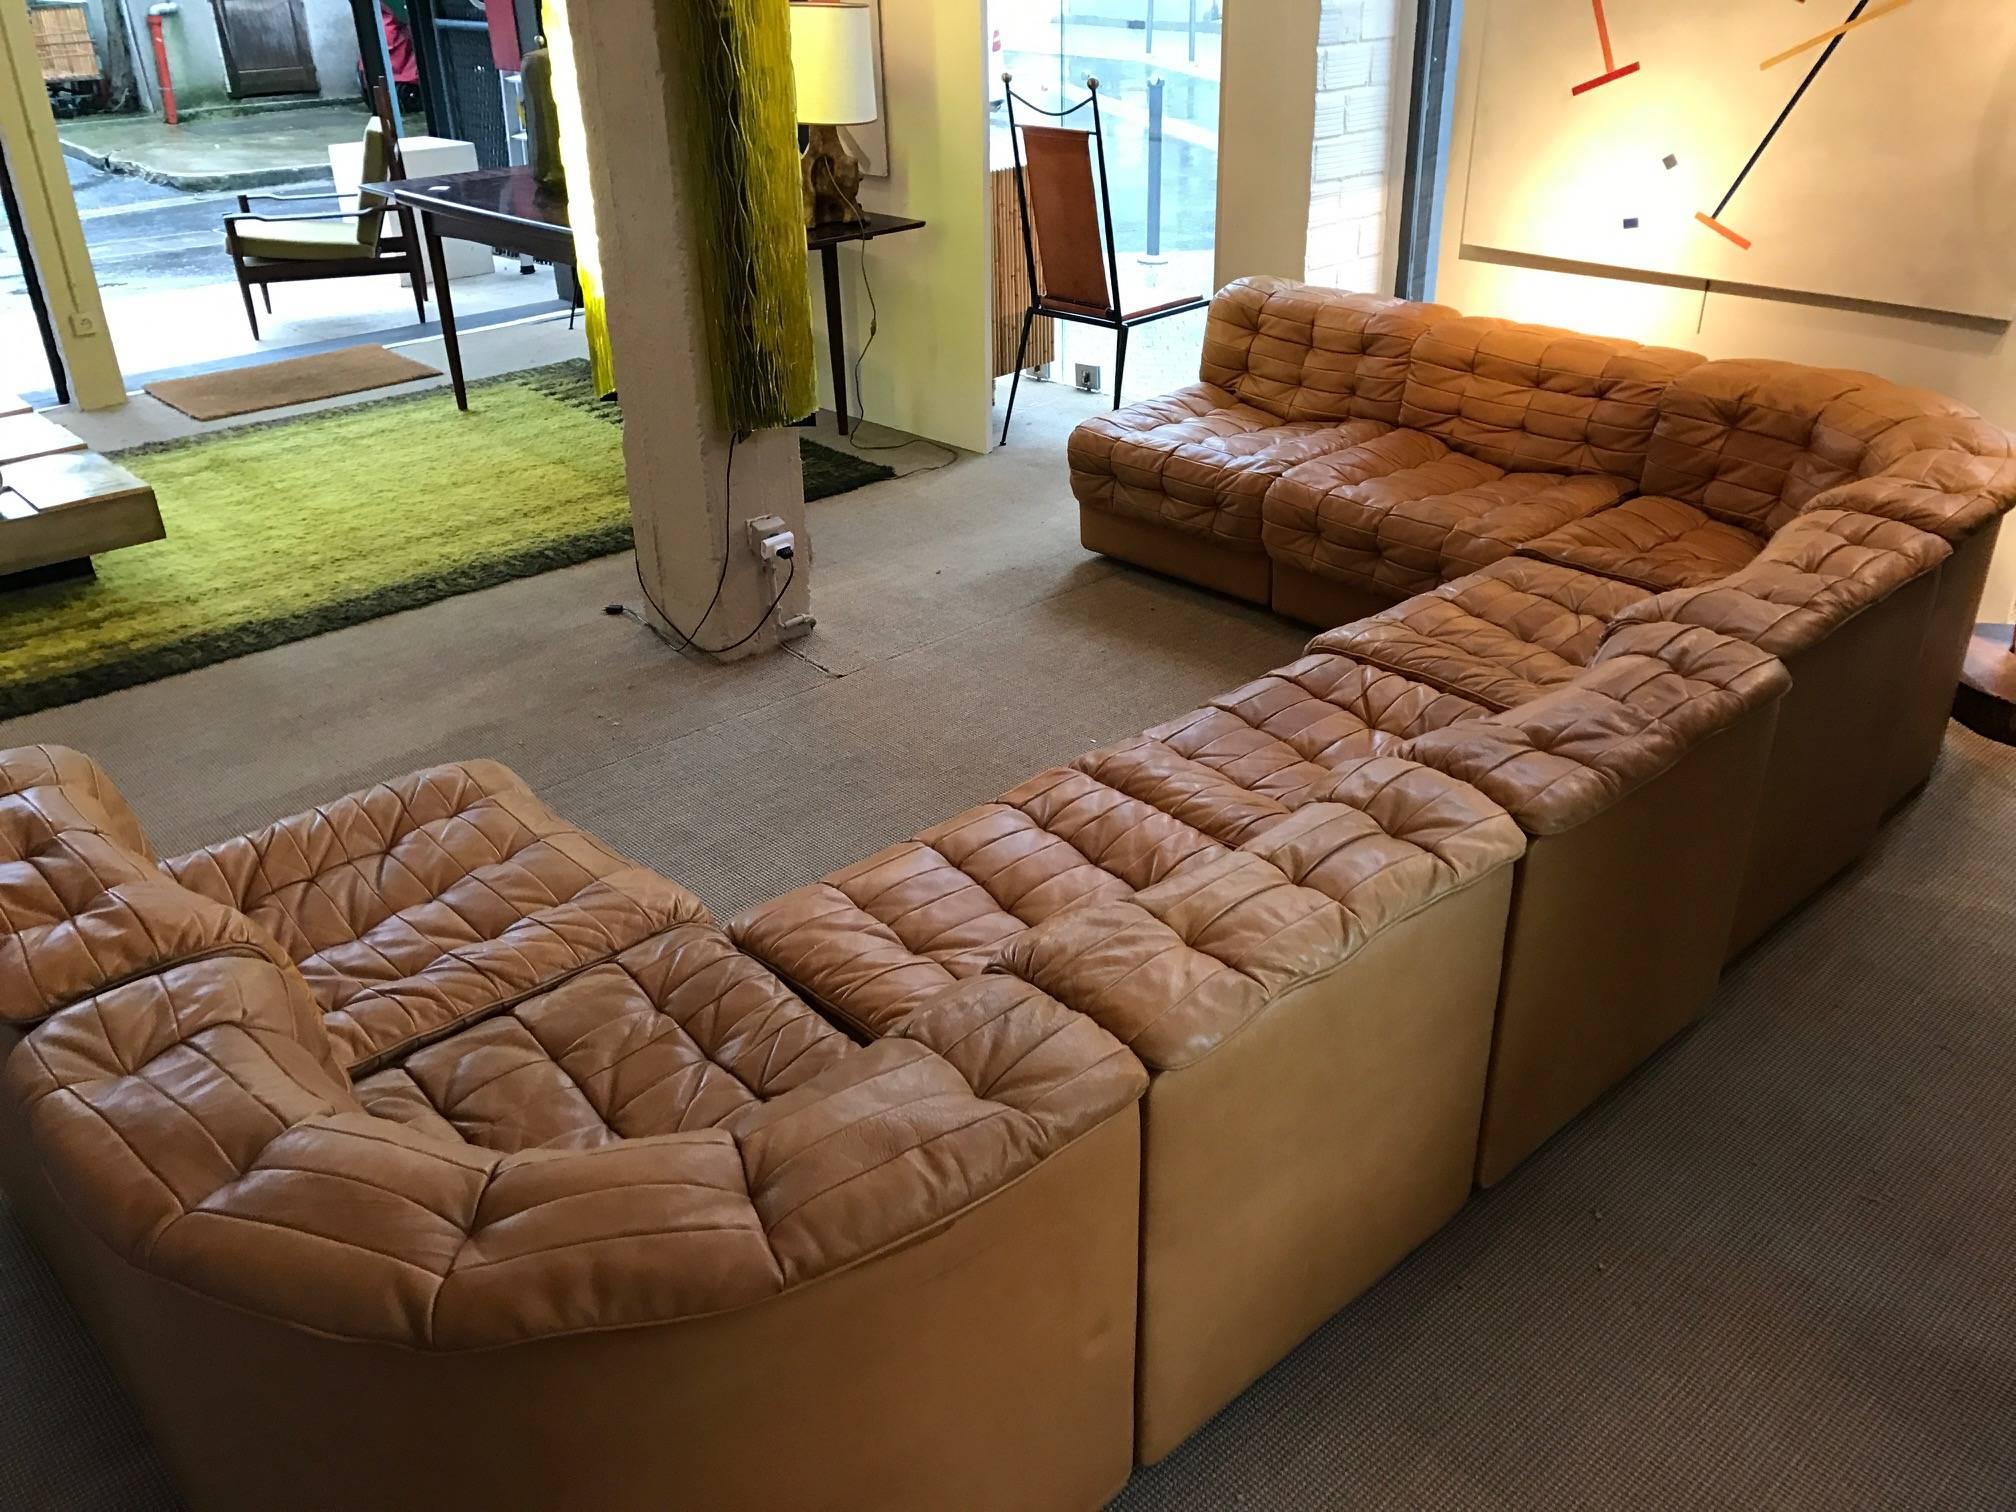 Leather sectional sofa by De Sede, DS11 model.
Six elements measuring 65 cm wide and 85 cm deep and two corner elements (85 x 85 cm.).